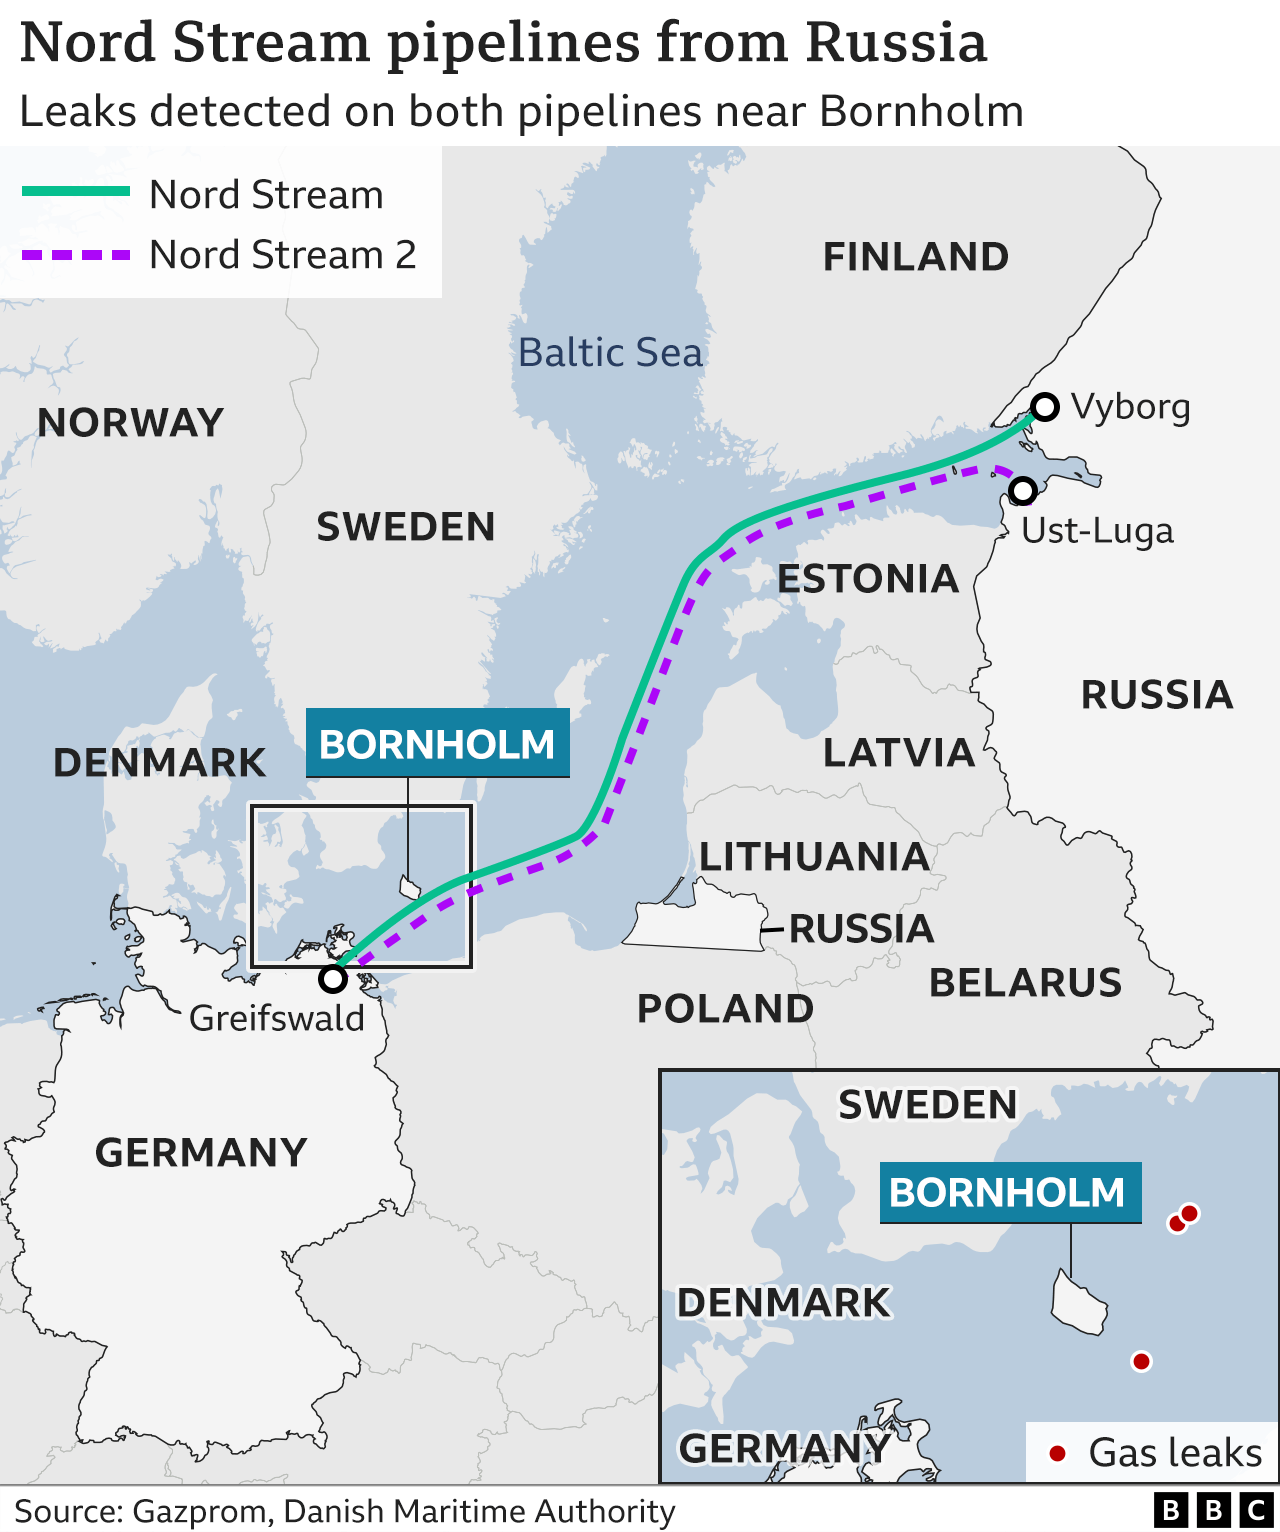 Map showing the route of the Nord Stream pipelines between Russia and Germany.